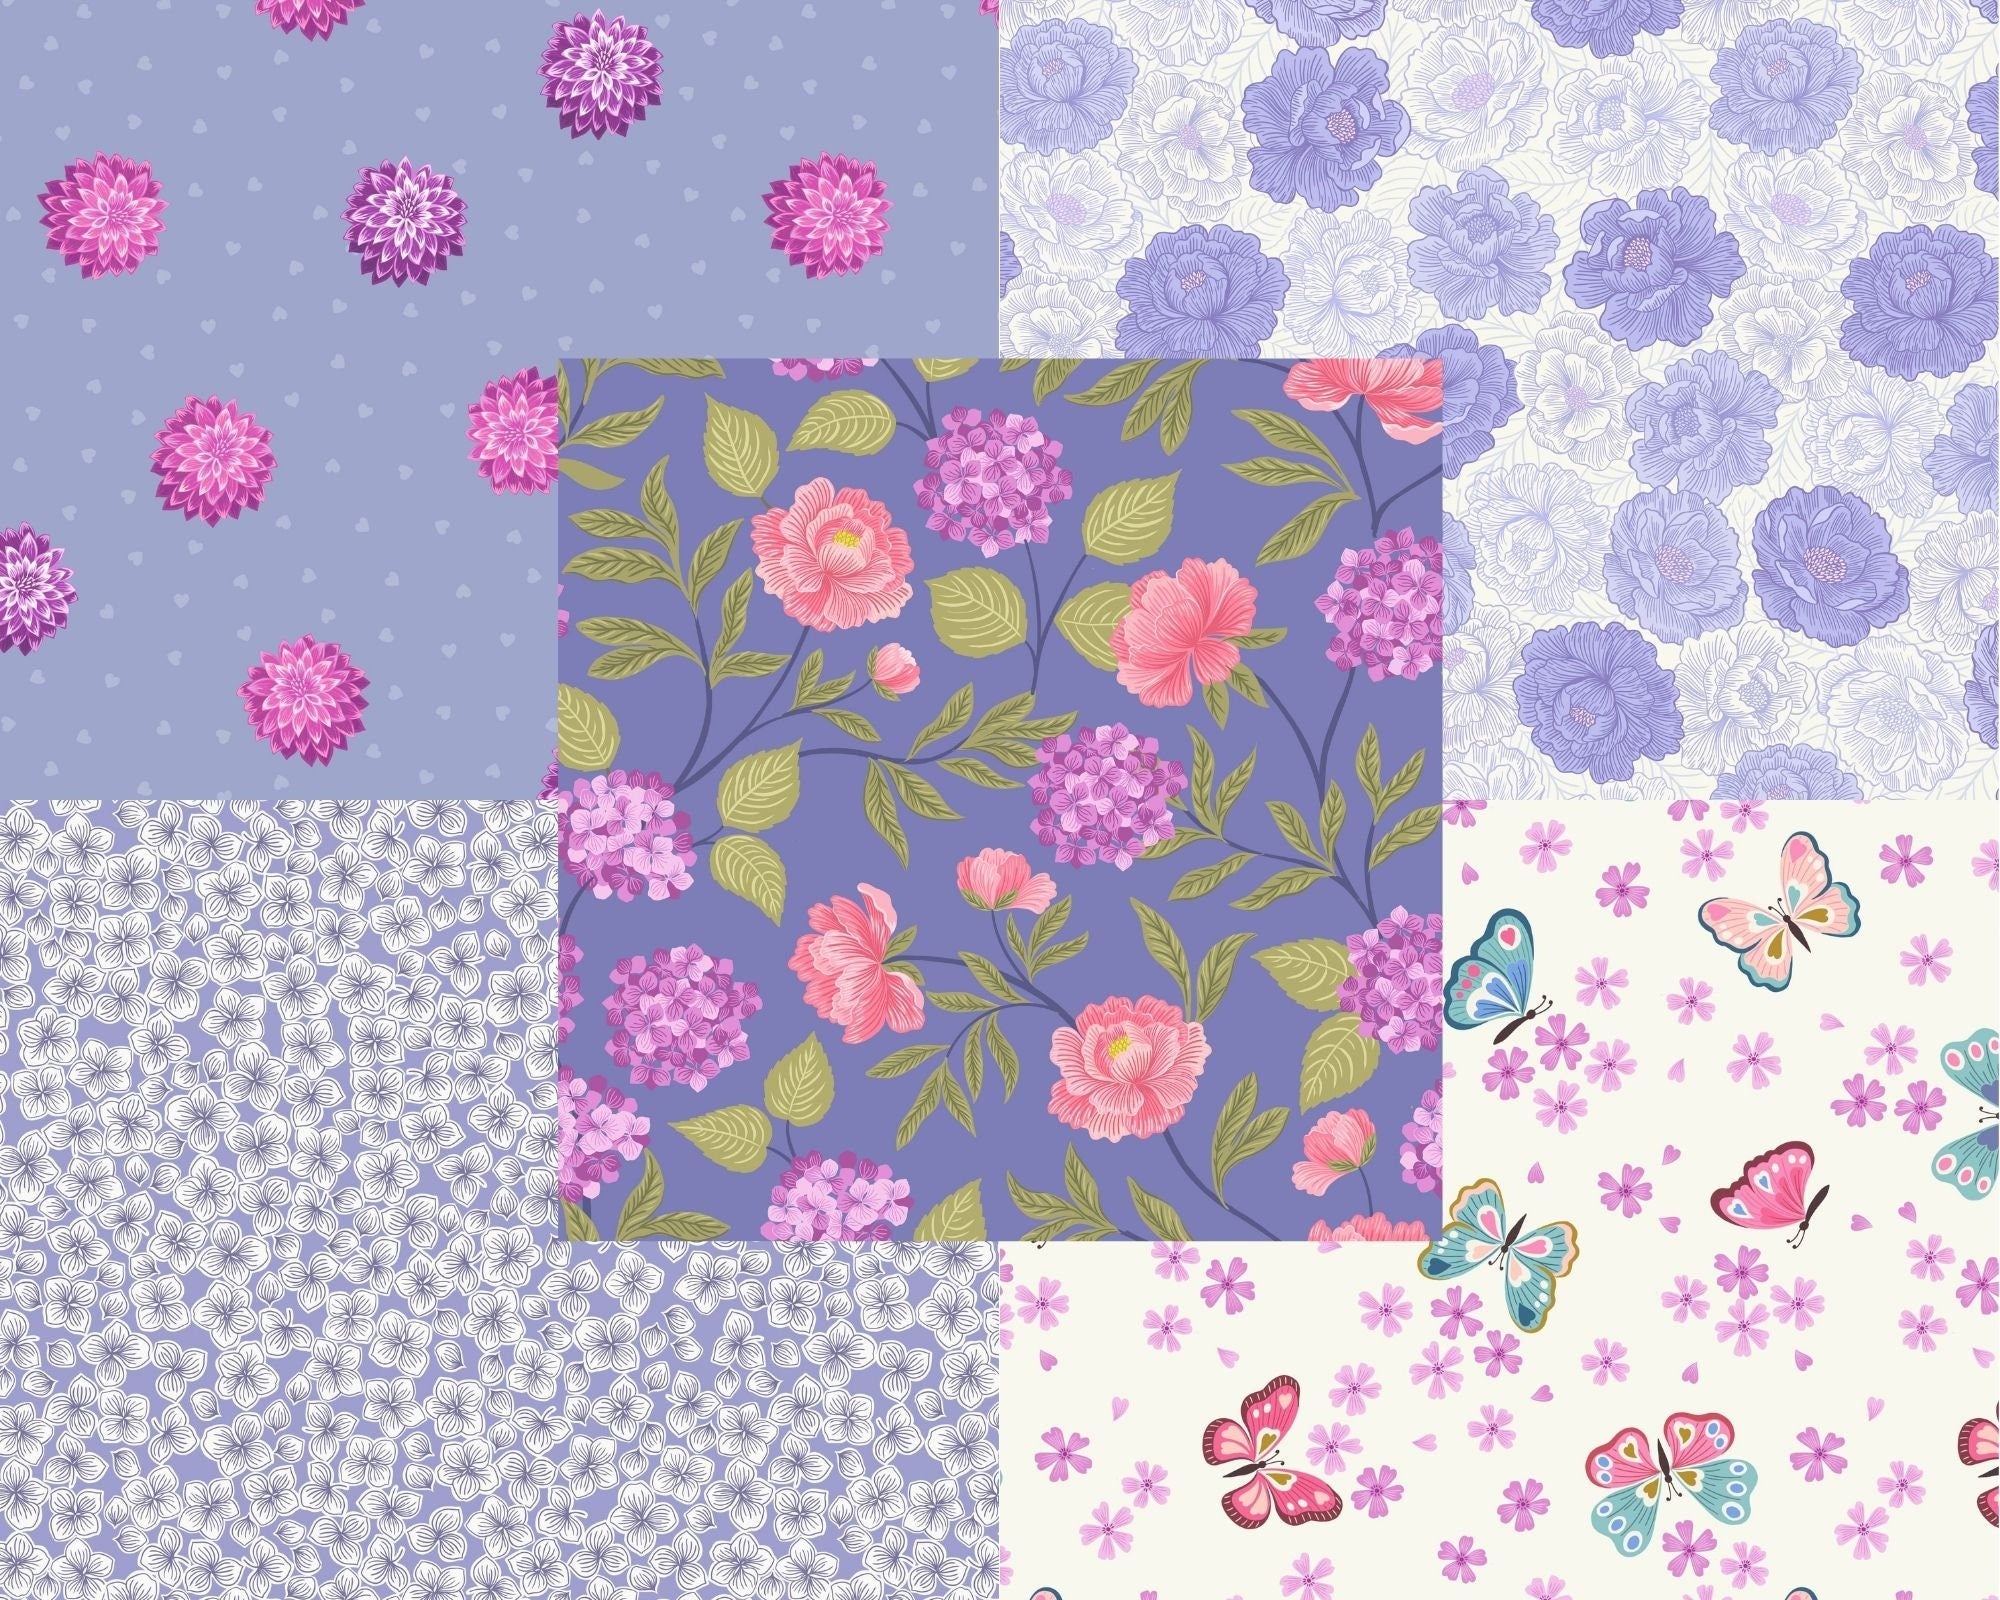 Pink Dahlia hearts on  purple cotton fabric - Love Blooms by Lewis & Irene